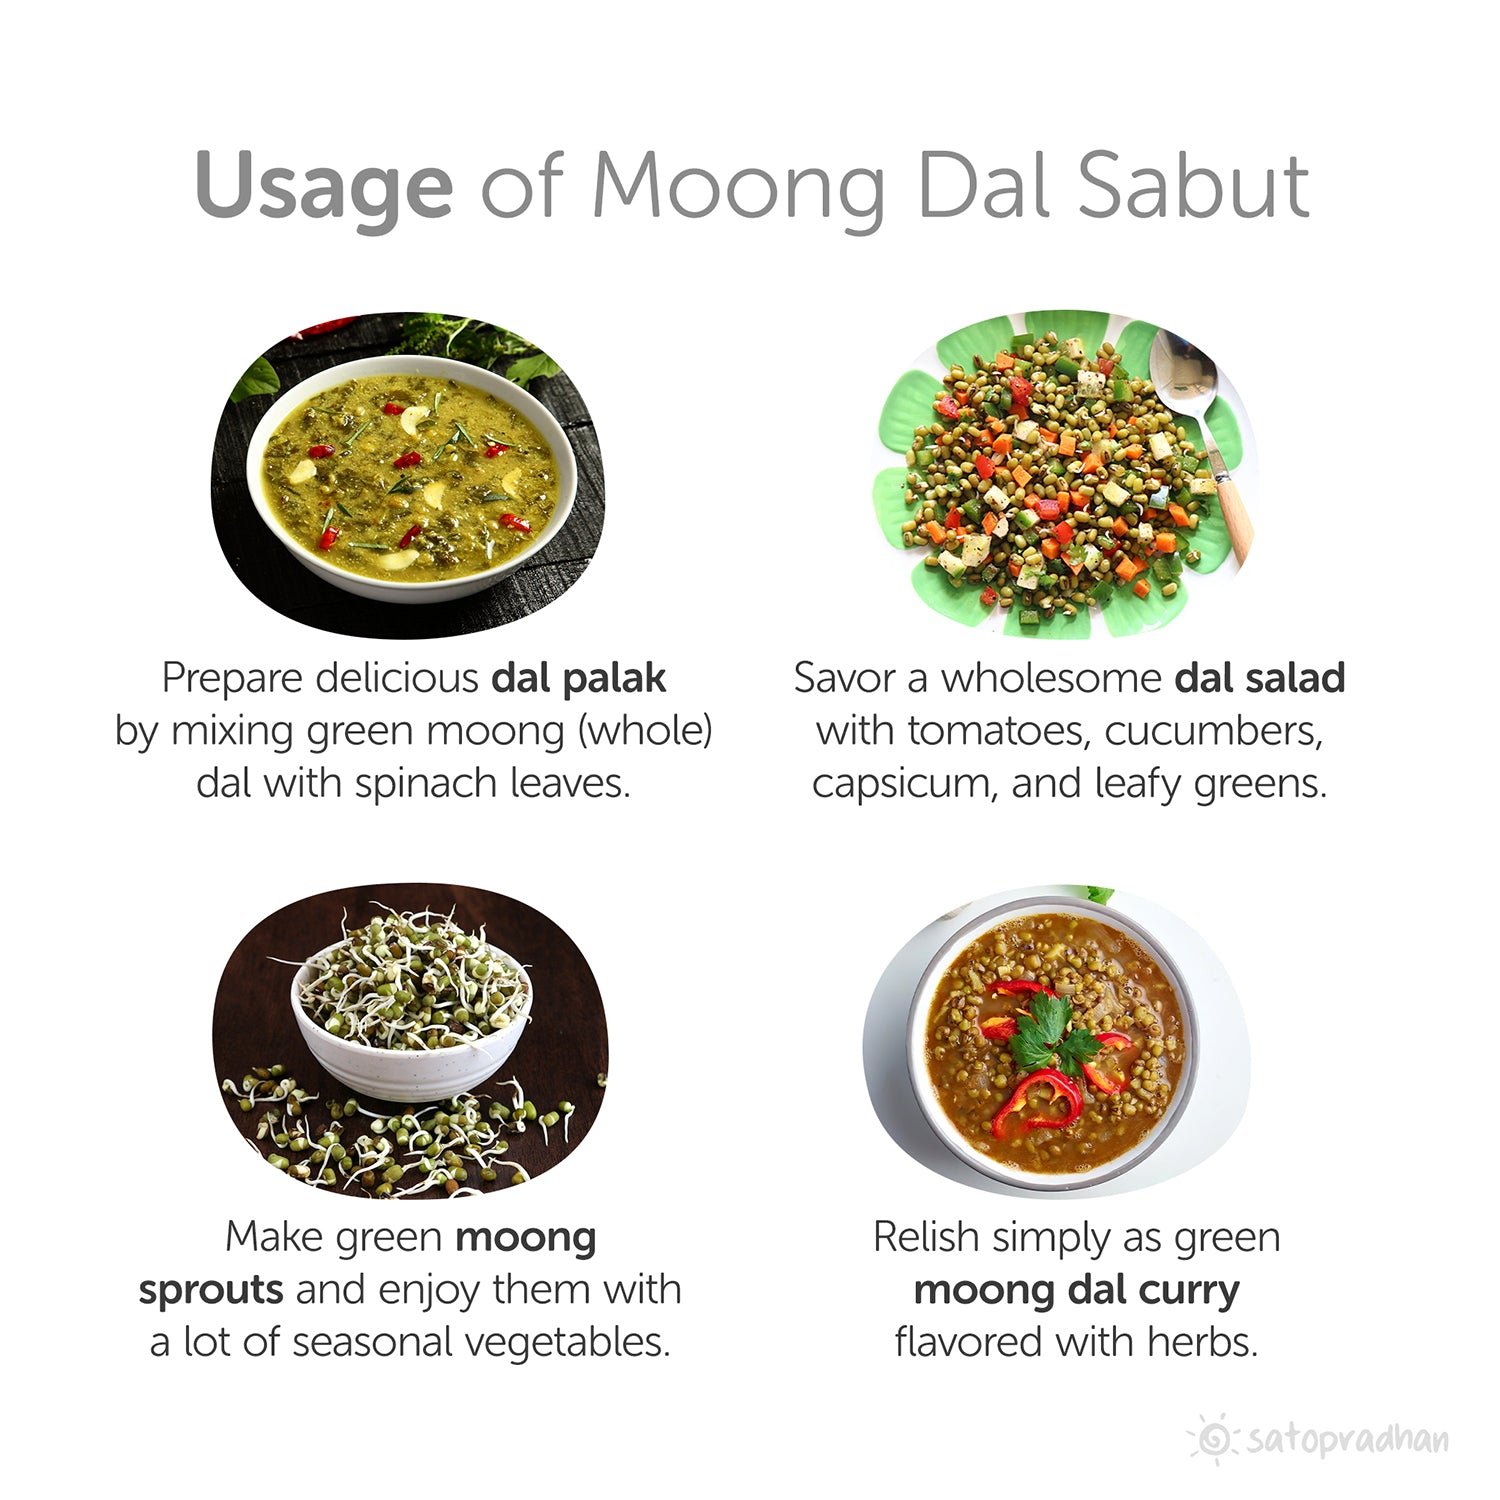 Moong Dal Sabut - Green Gram Whole 800g - Finest Quality, Organic, Raw, Unpolished & Wholesome - No Preservatives